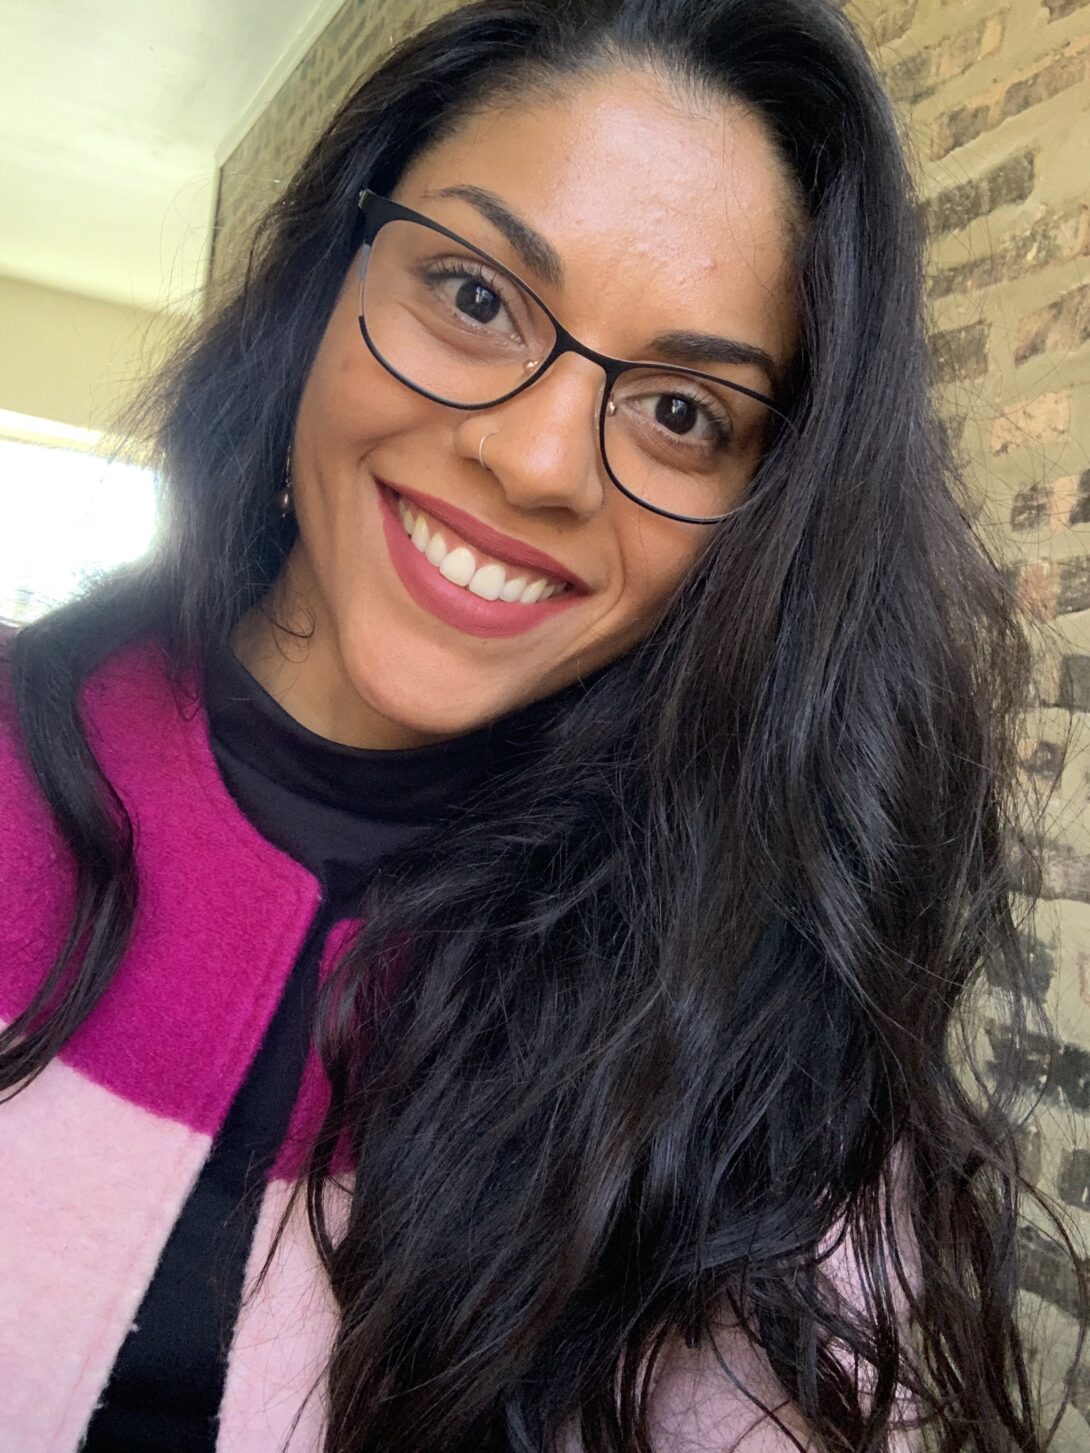 A person with glasses and black hair is centered in this selfie, with a brick wall in the background.